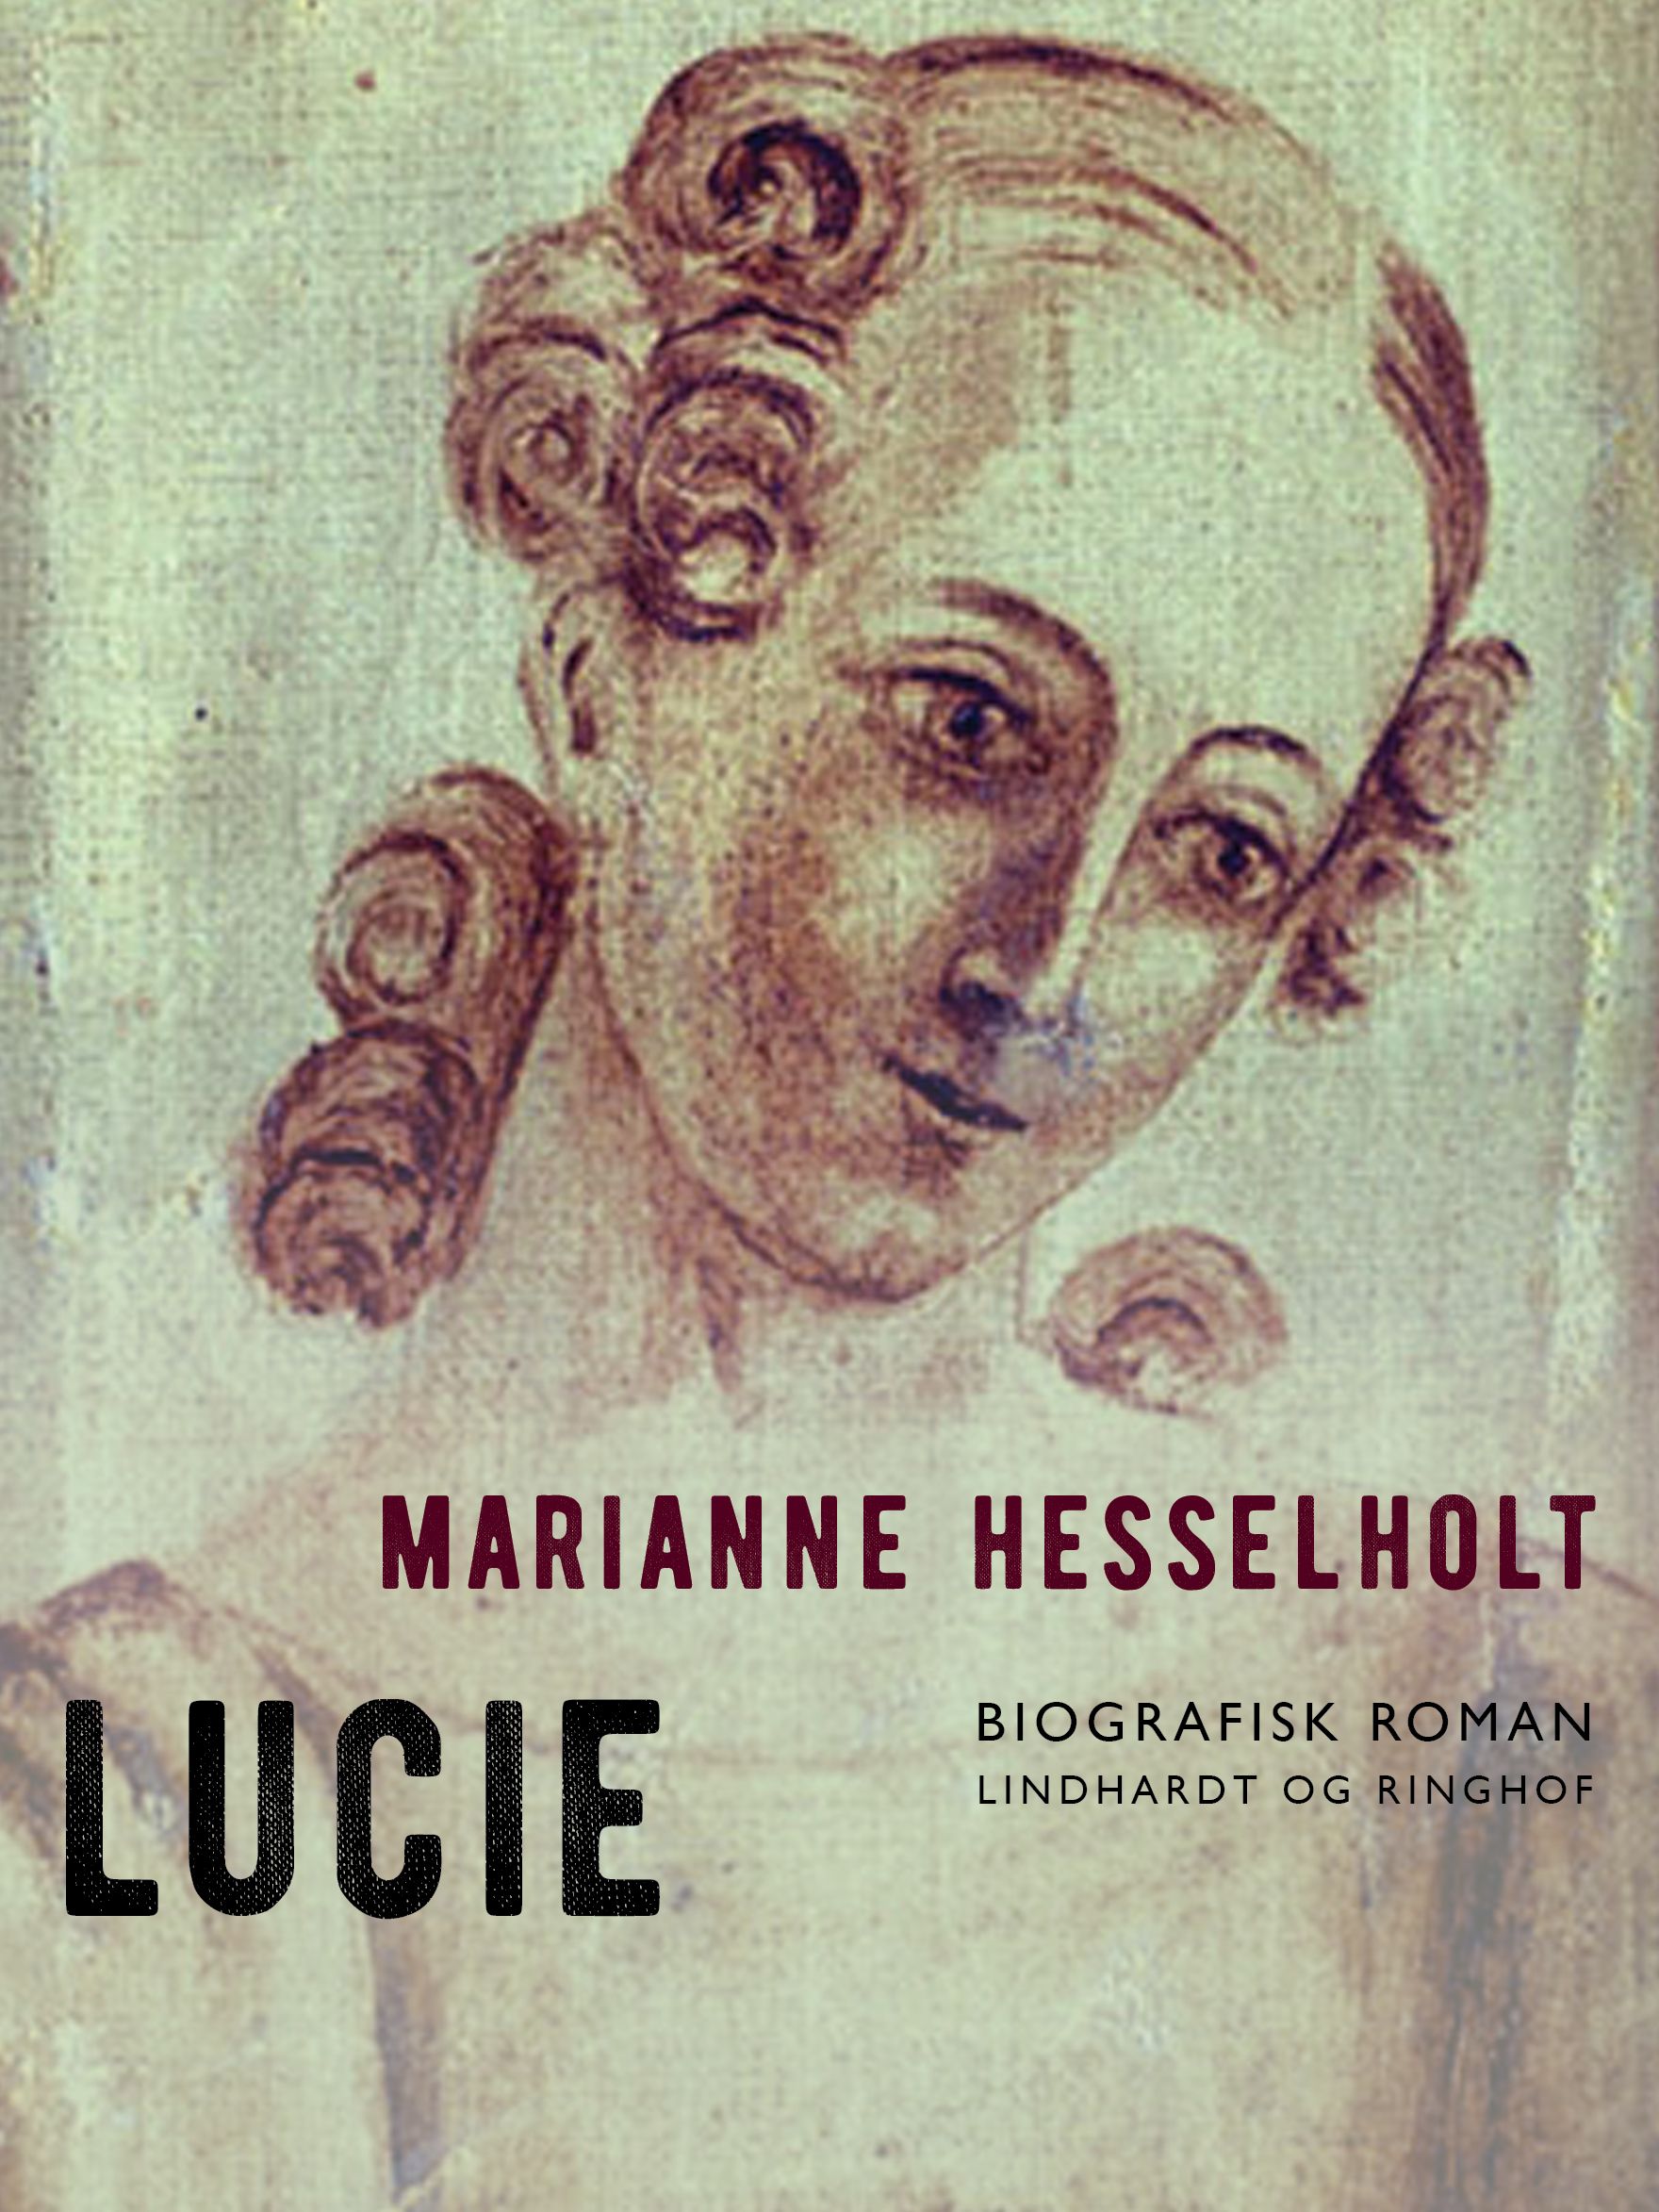 Lucie, eBook by Marianne Hesselholt